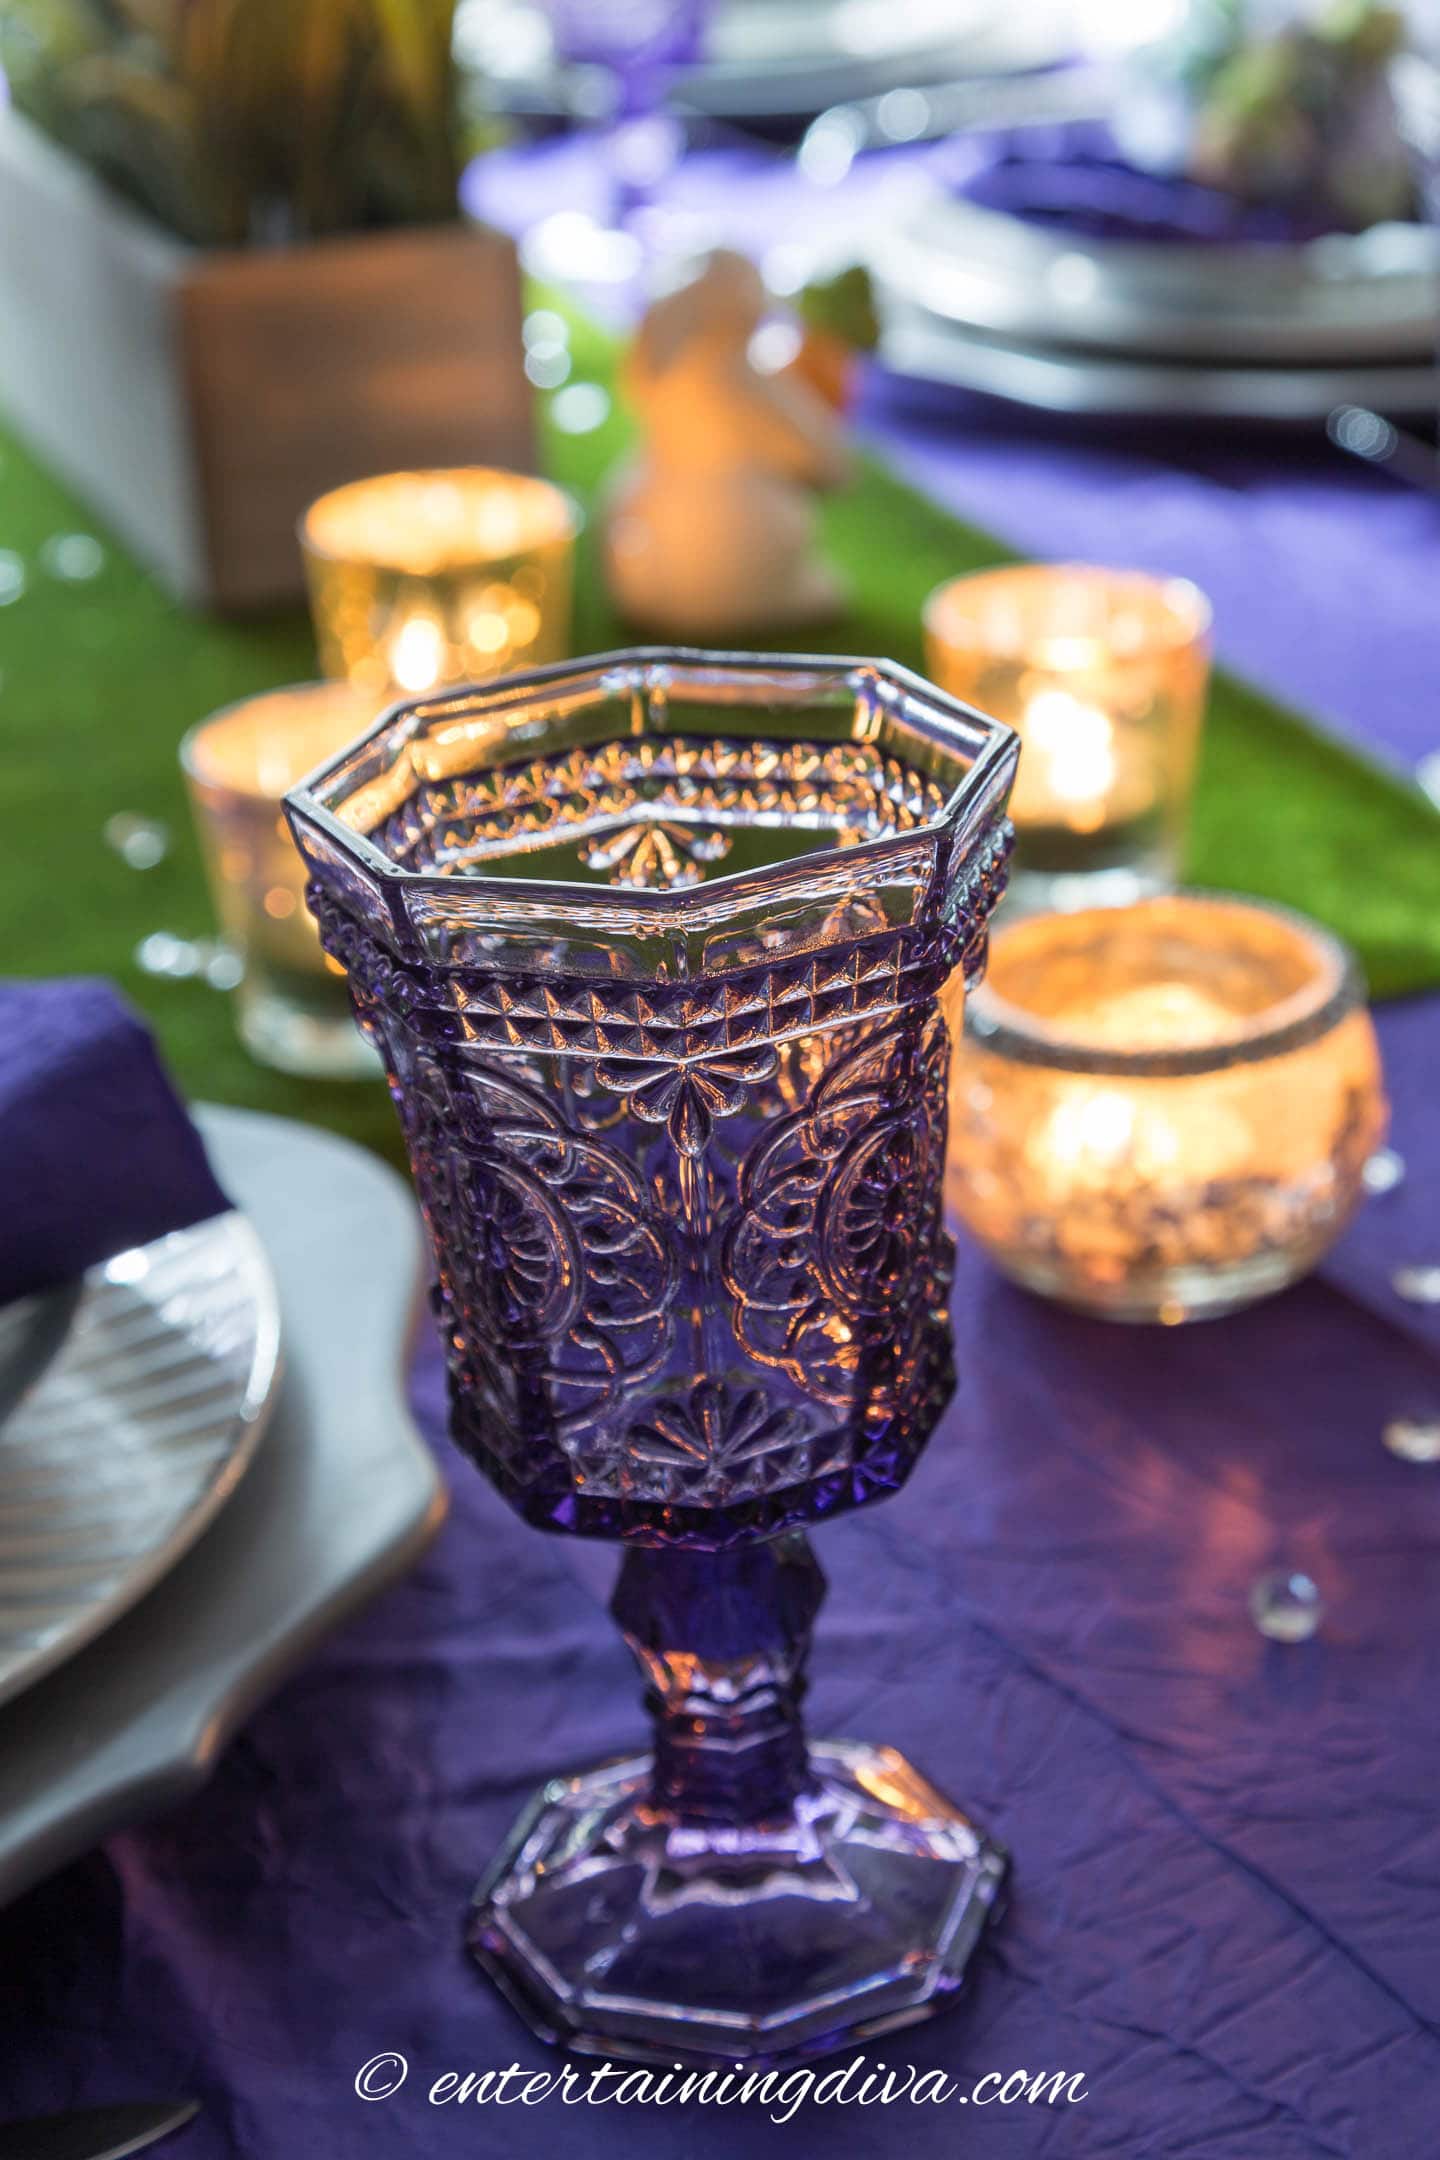 Purple stemmed glass on a purple and green Easter table